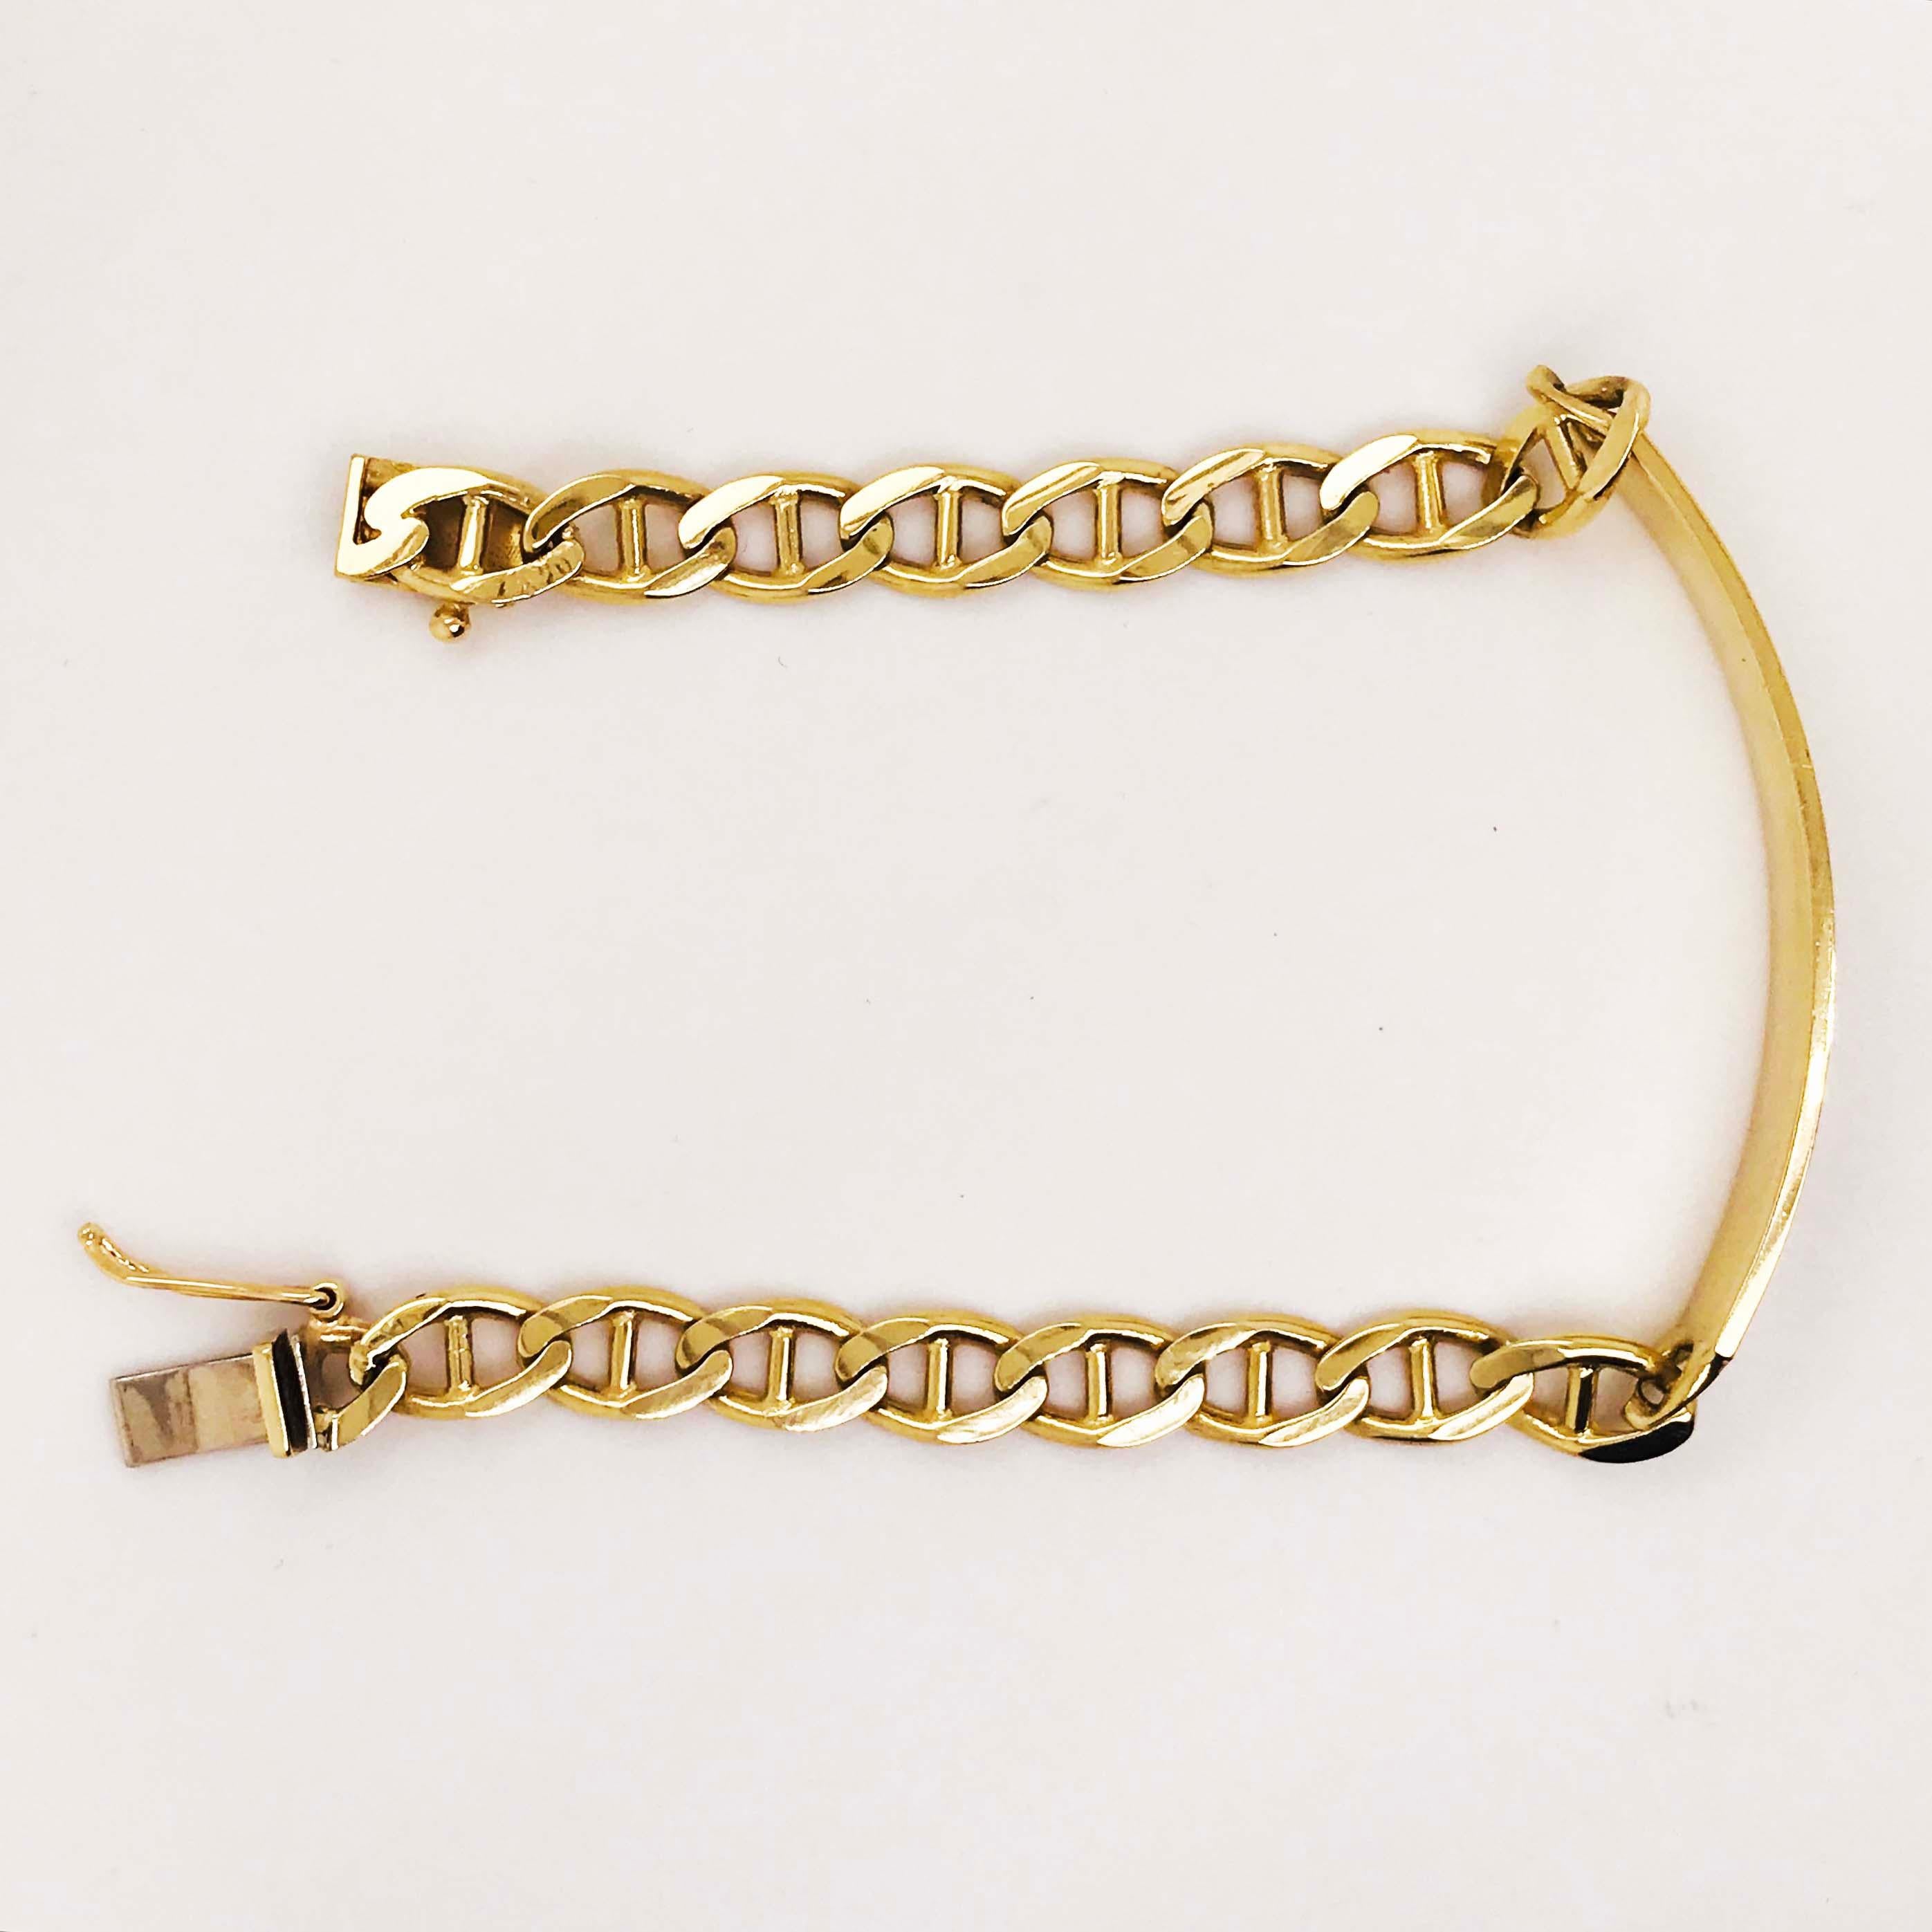 Engravable ID Bracelet in 14 kt Gold with Anchor Link Chain for Men or LG Woman 4